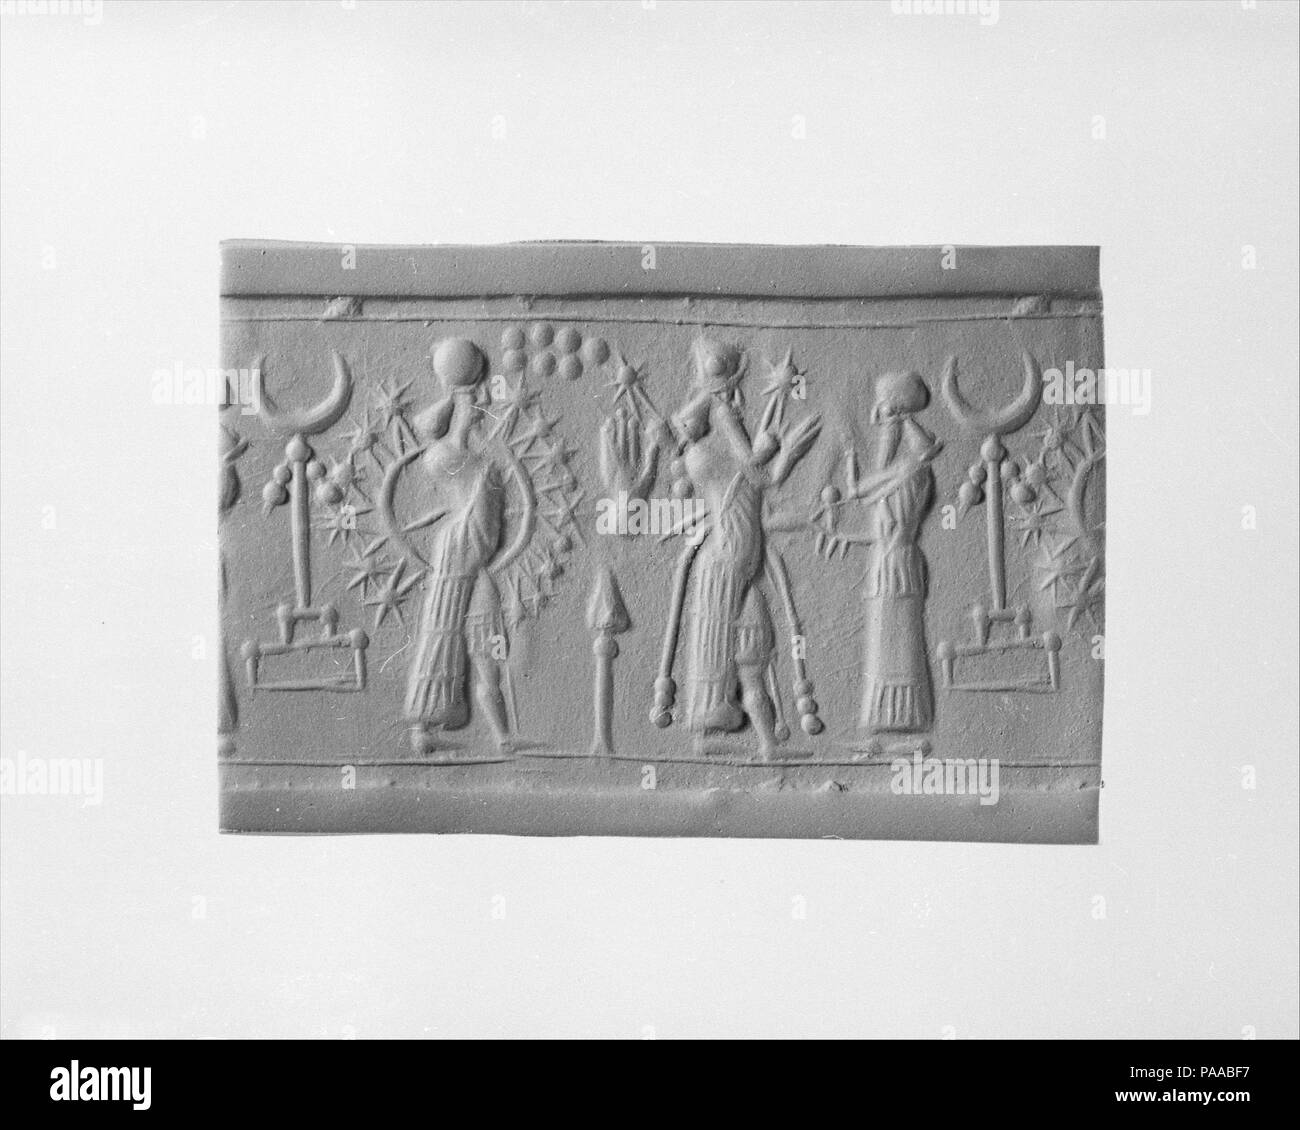 Cylinder seal and modern impression. Culture: Assyrian. Dimensions: 1.36 in. (3.45 cm). Date: ca. 9th-8th century B.C.. Museum: Metropolitan Museum of Art, New York, USA. Stock Photo